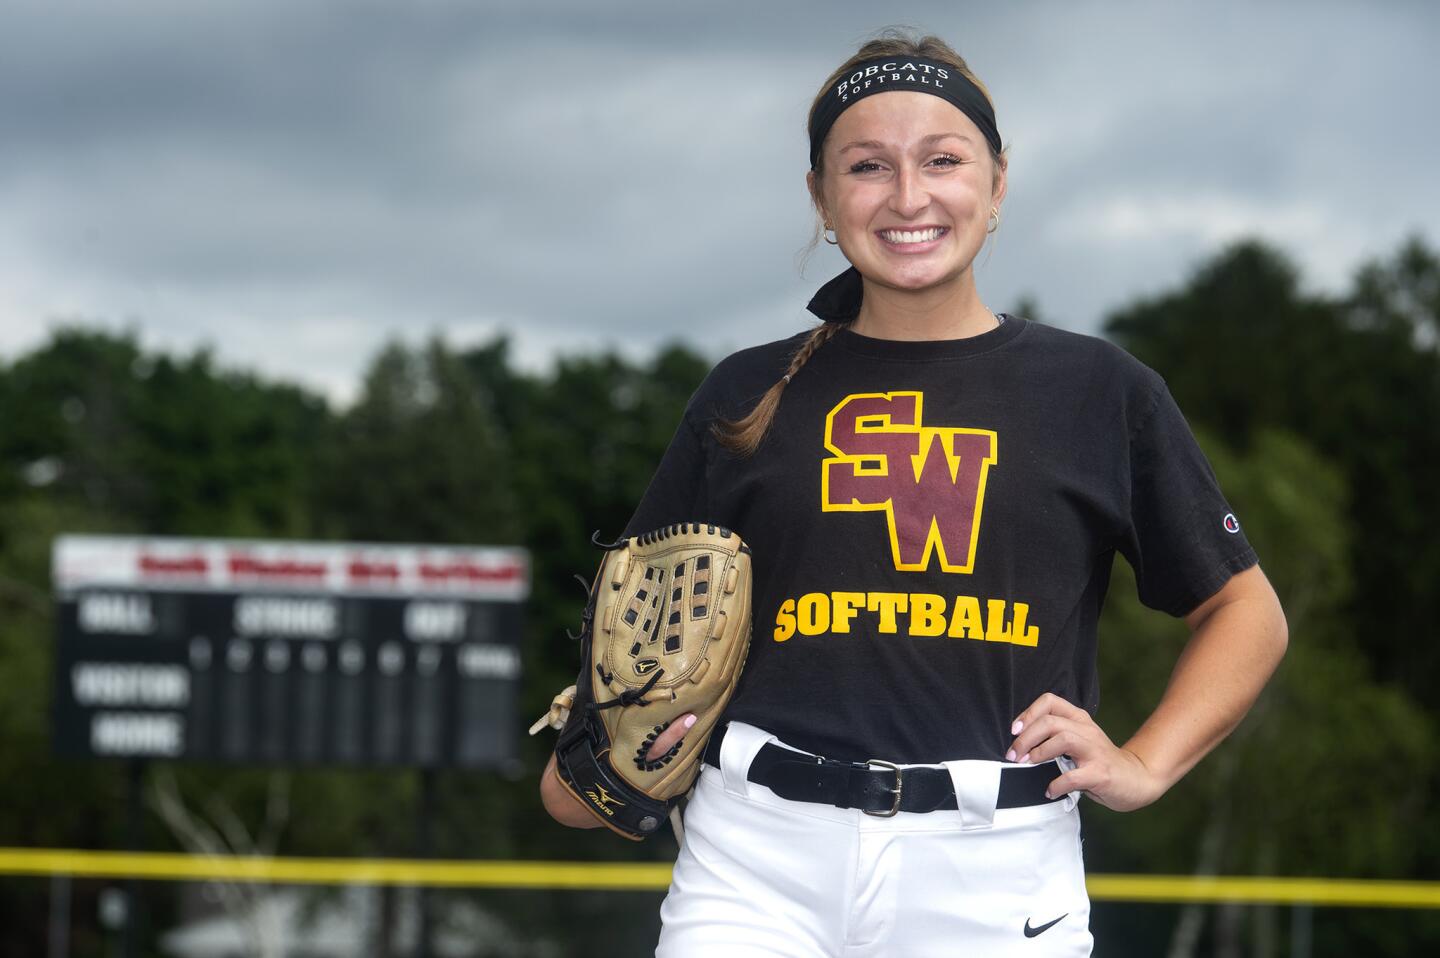 SOUTH WINDSOR, CT - 06.19.2019 - ALL-COURANT - Maria Hanchuk, 18, a senior pitcher from South Windsor, is the Courant's softball player of the year. Hanchuk plans to attend Endicott College this fall. PATRICK RAYCRAFT | praycraft@courant.com